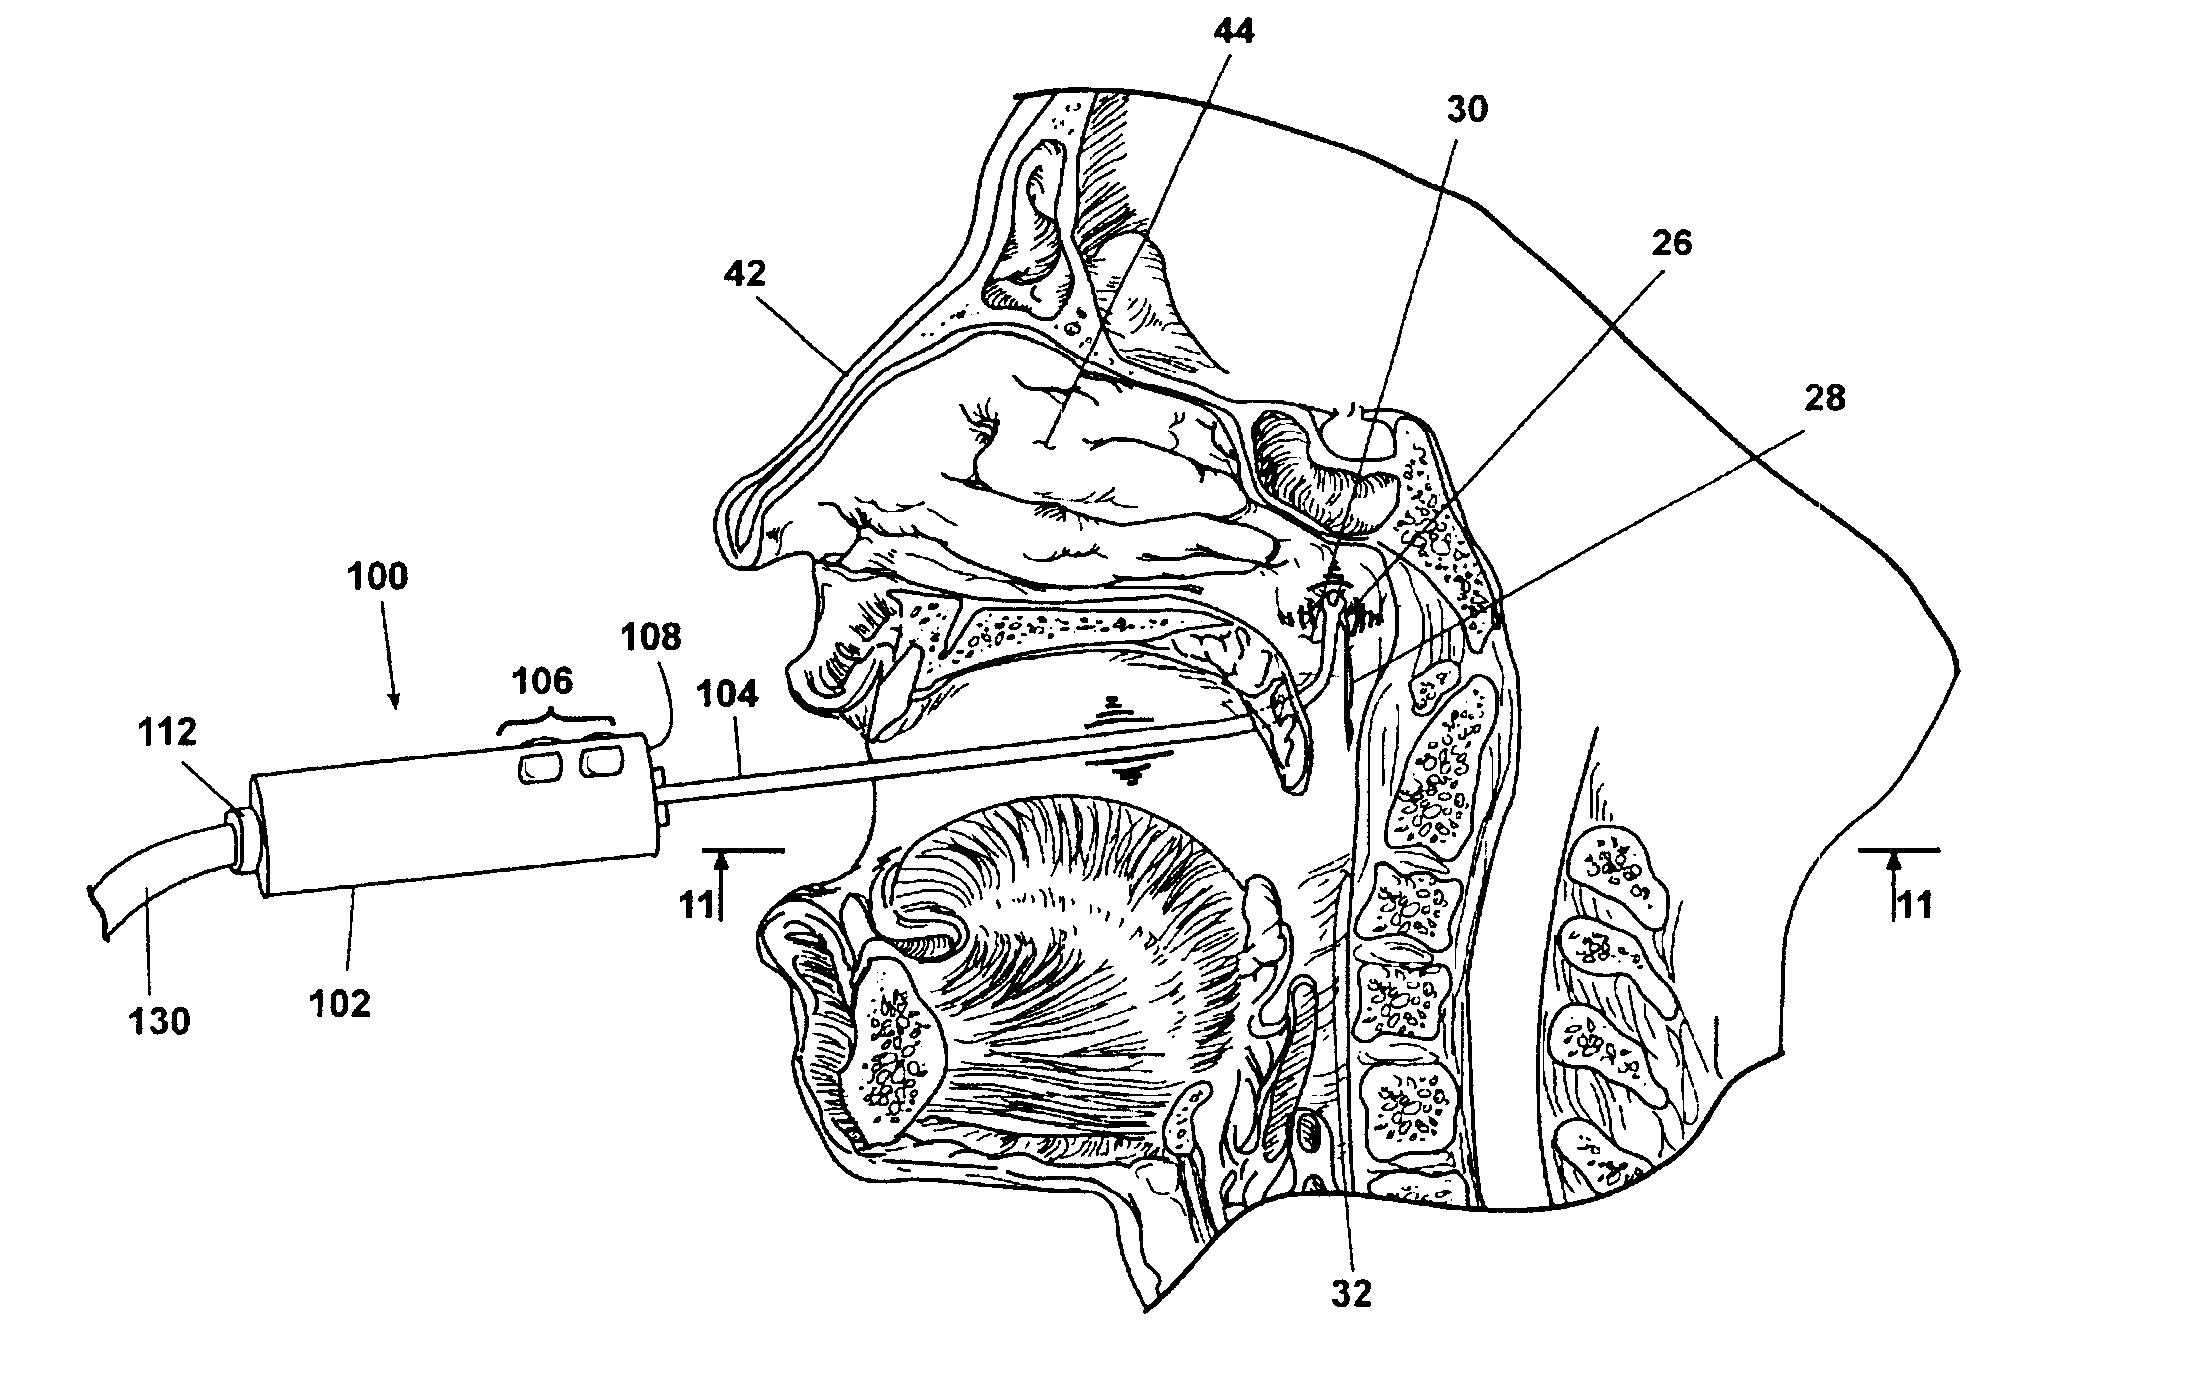 Method and apparatus for relieving fluid build-up in the middle ear